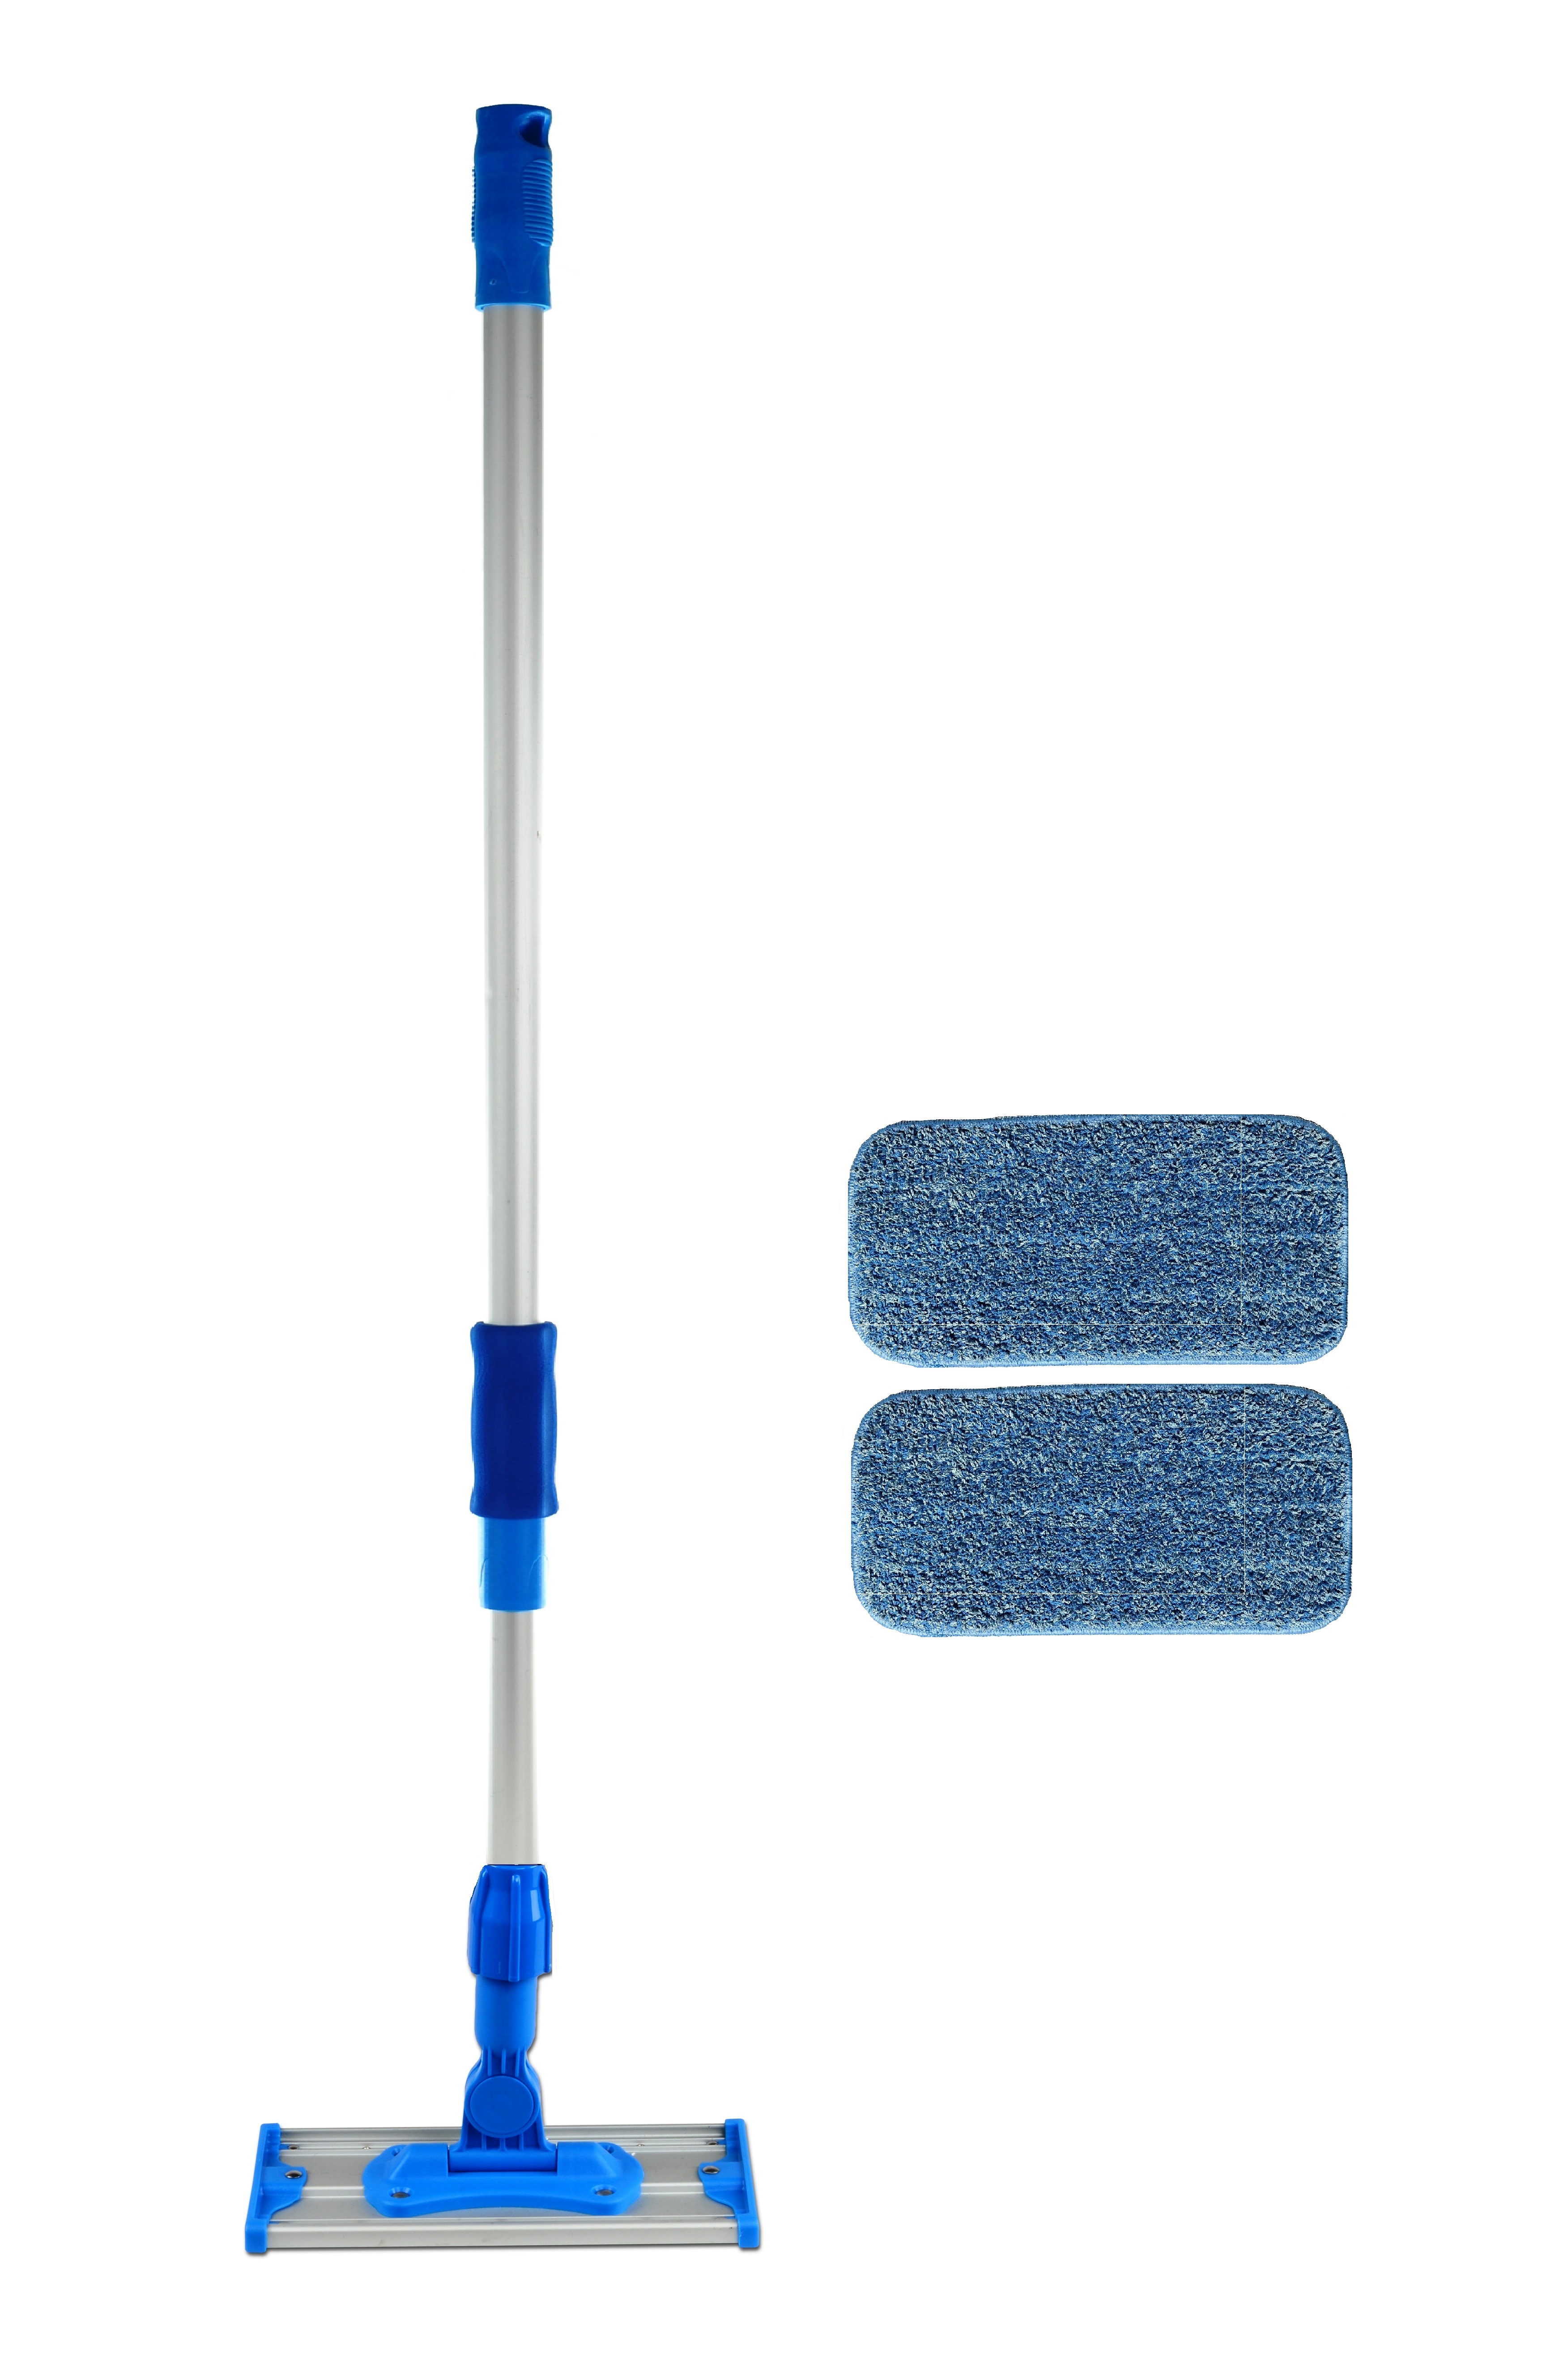 10 inch Professional Commercial Microfiber Mini Mop Kit With Two 10 inch  Microfiber Mop Pads and Light Weight Aluminum Mop Frame and Handle 